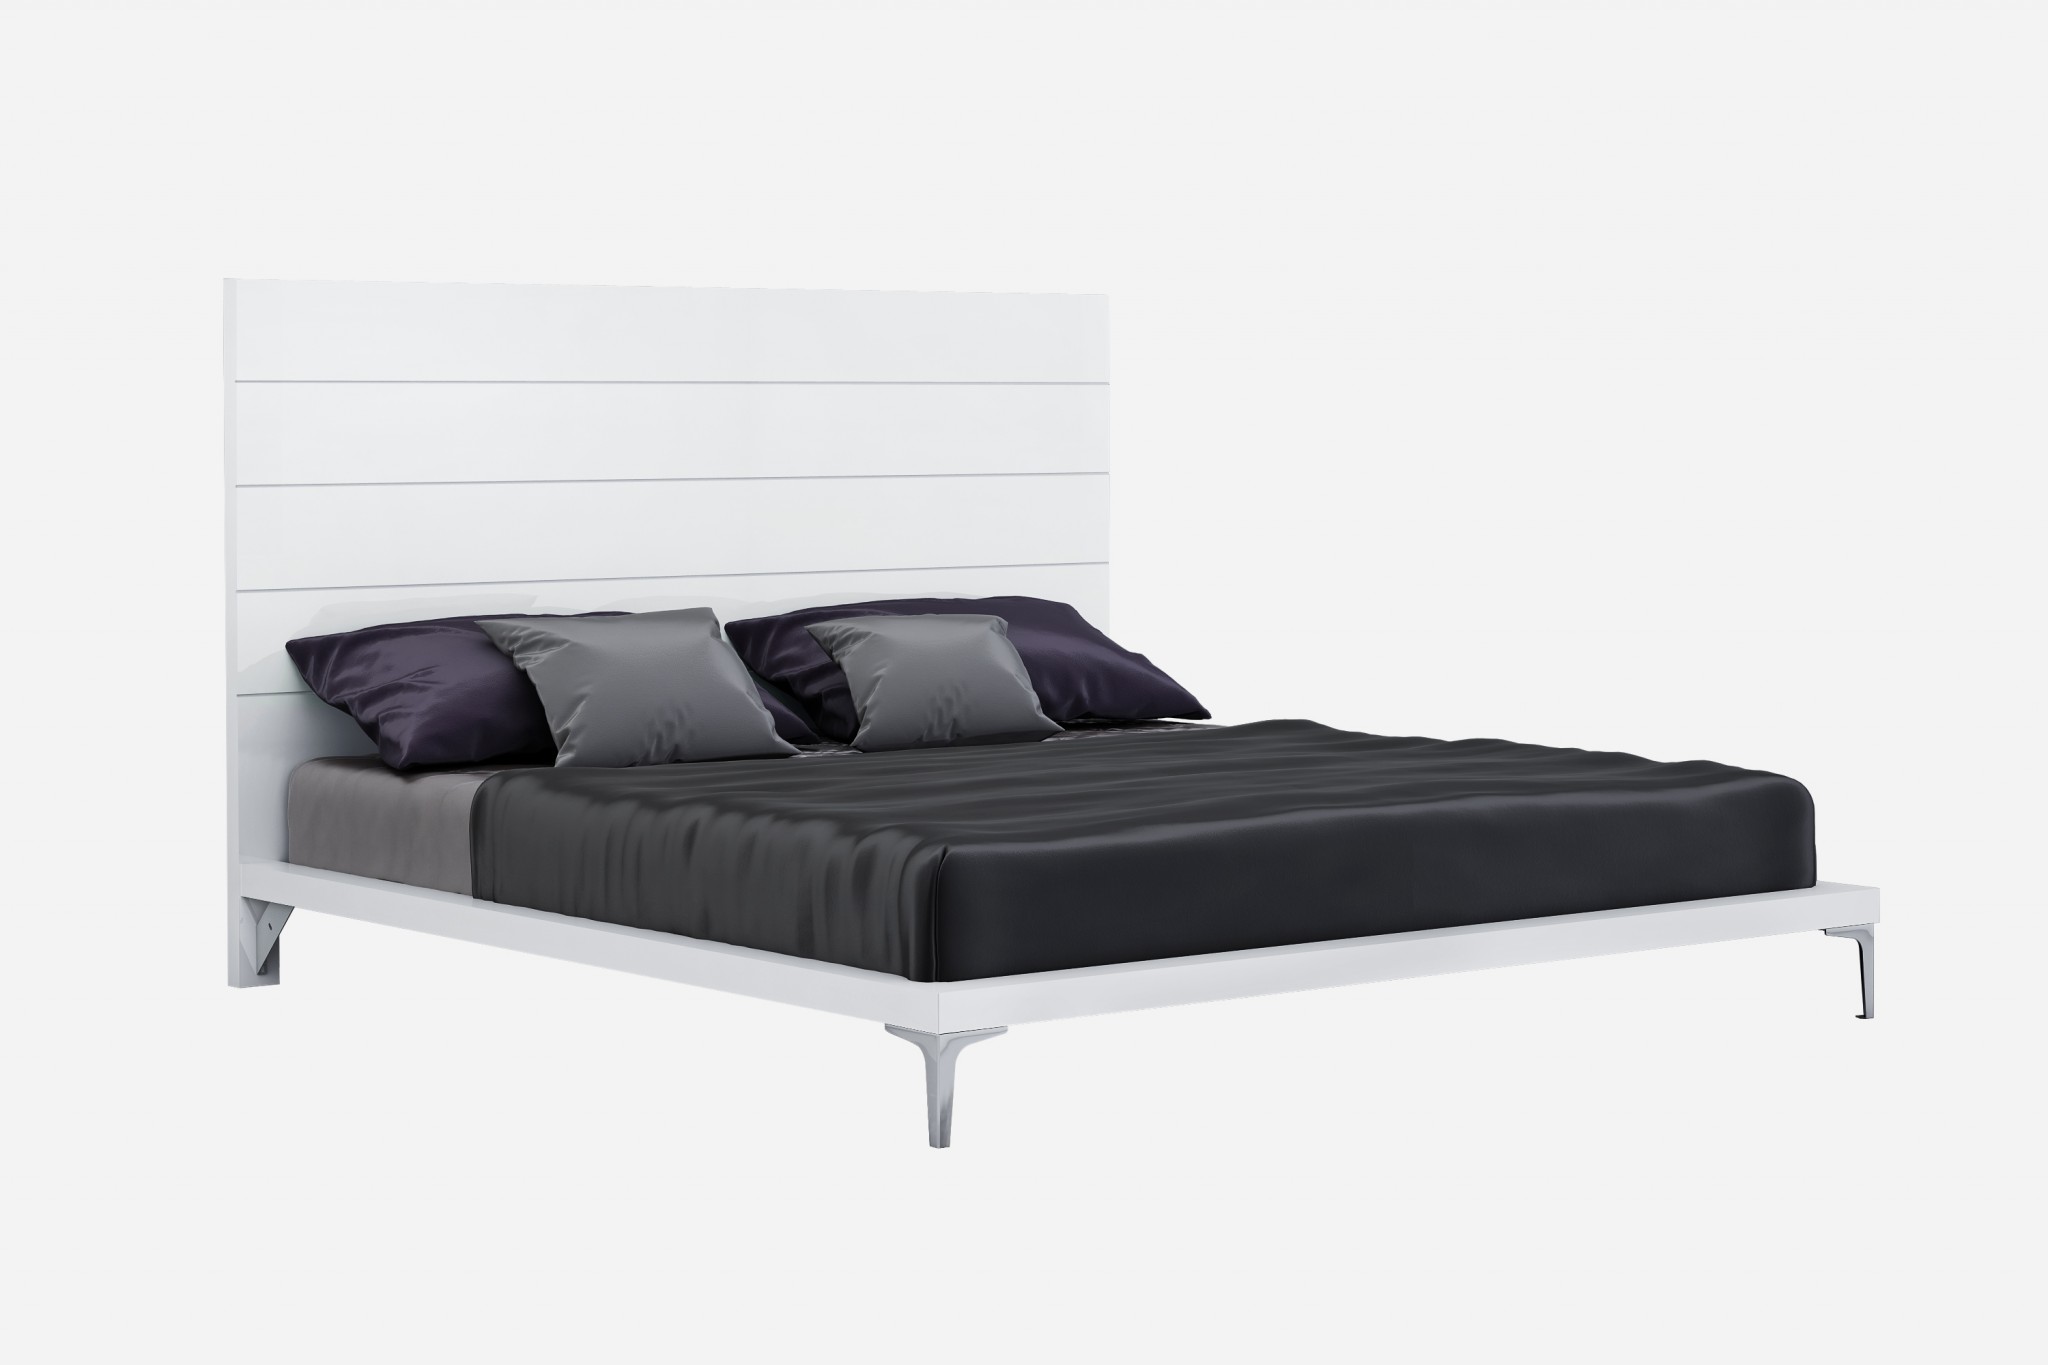 60" X 80" X 51" White Stainless Steel Queen Bed